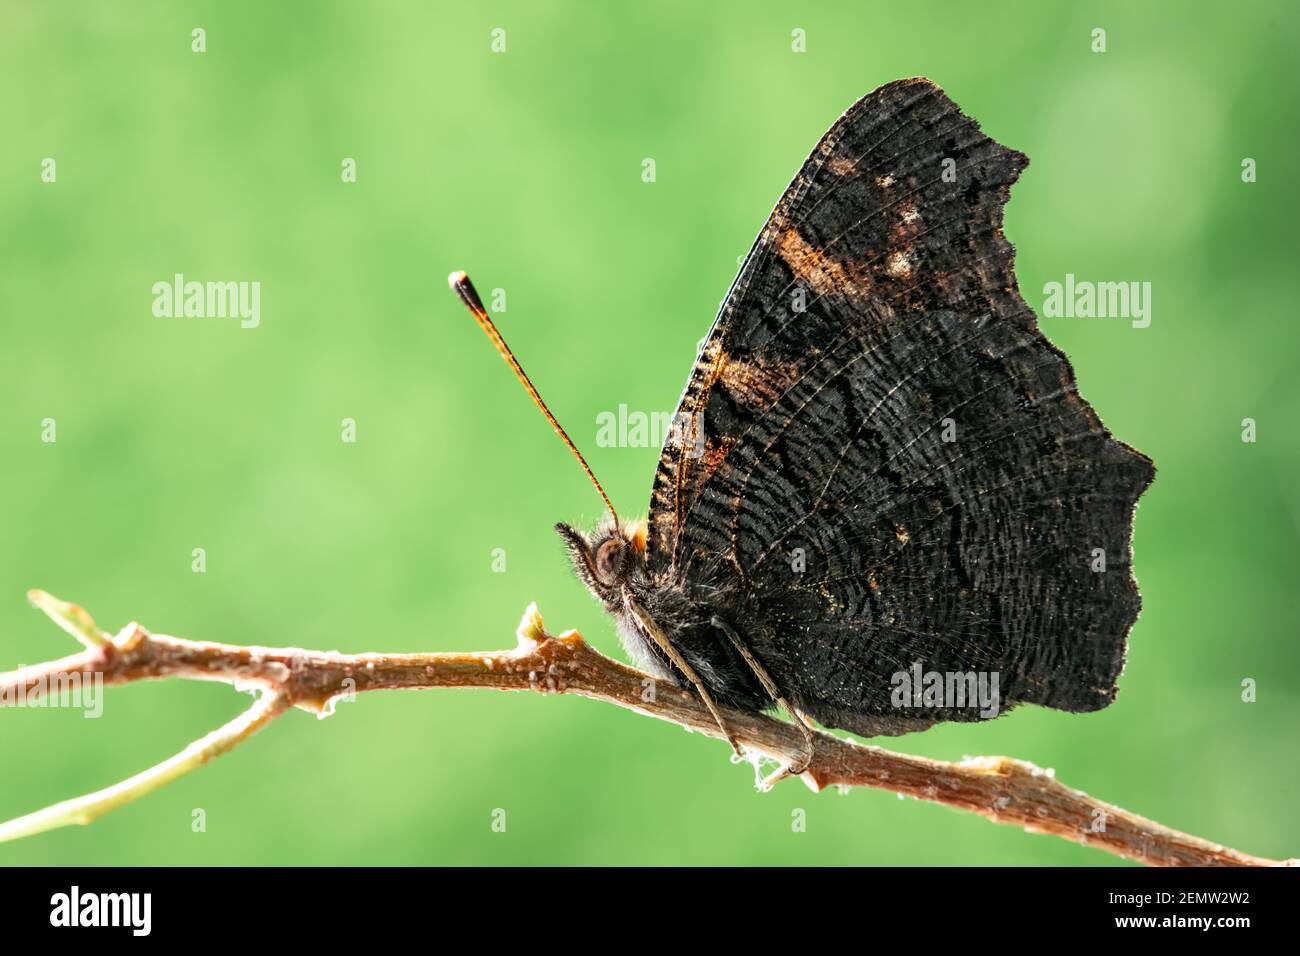 Closeup butterfly on twig on green background. Macro insect photography Stock Photo